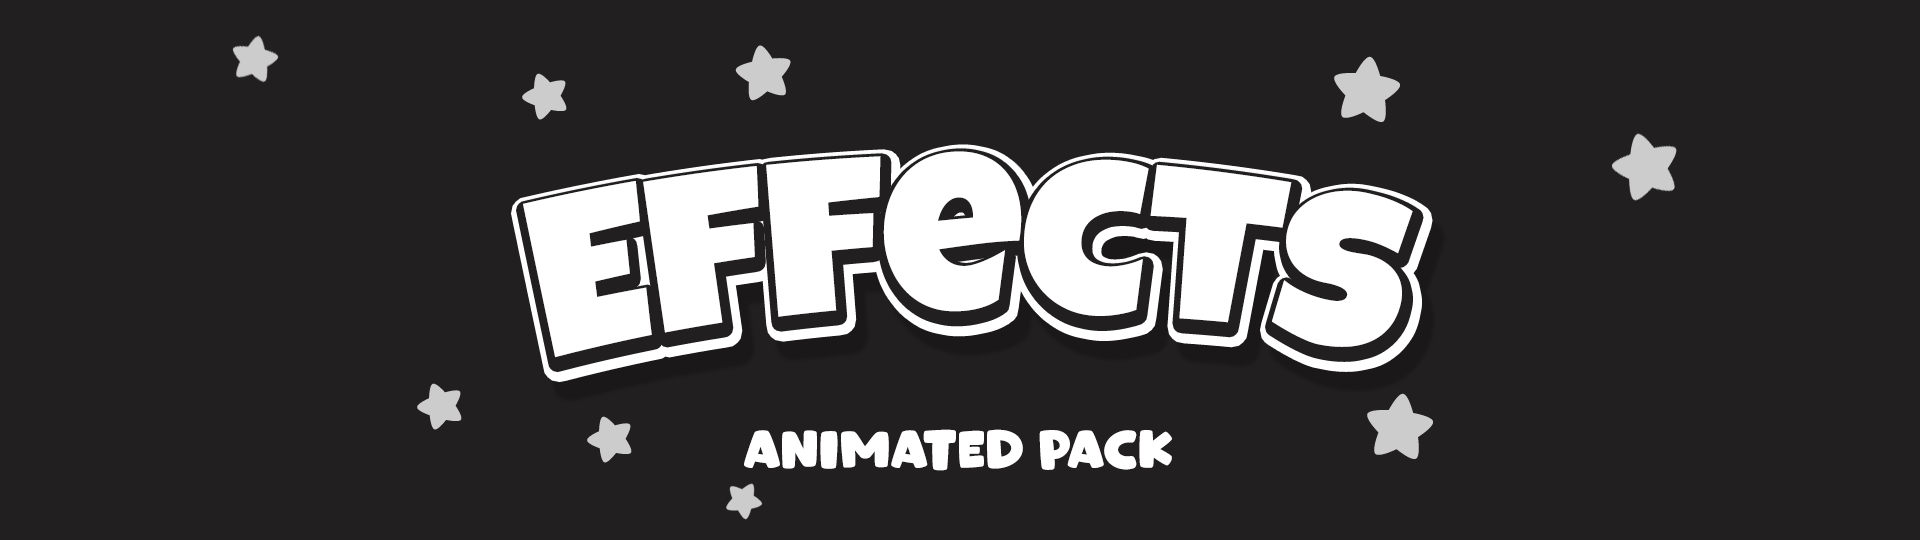 70 Animated Effects